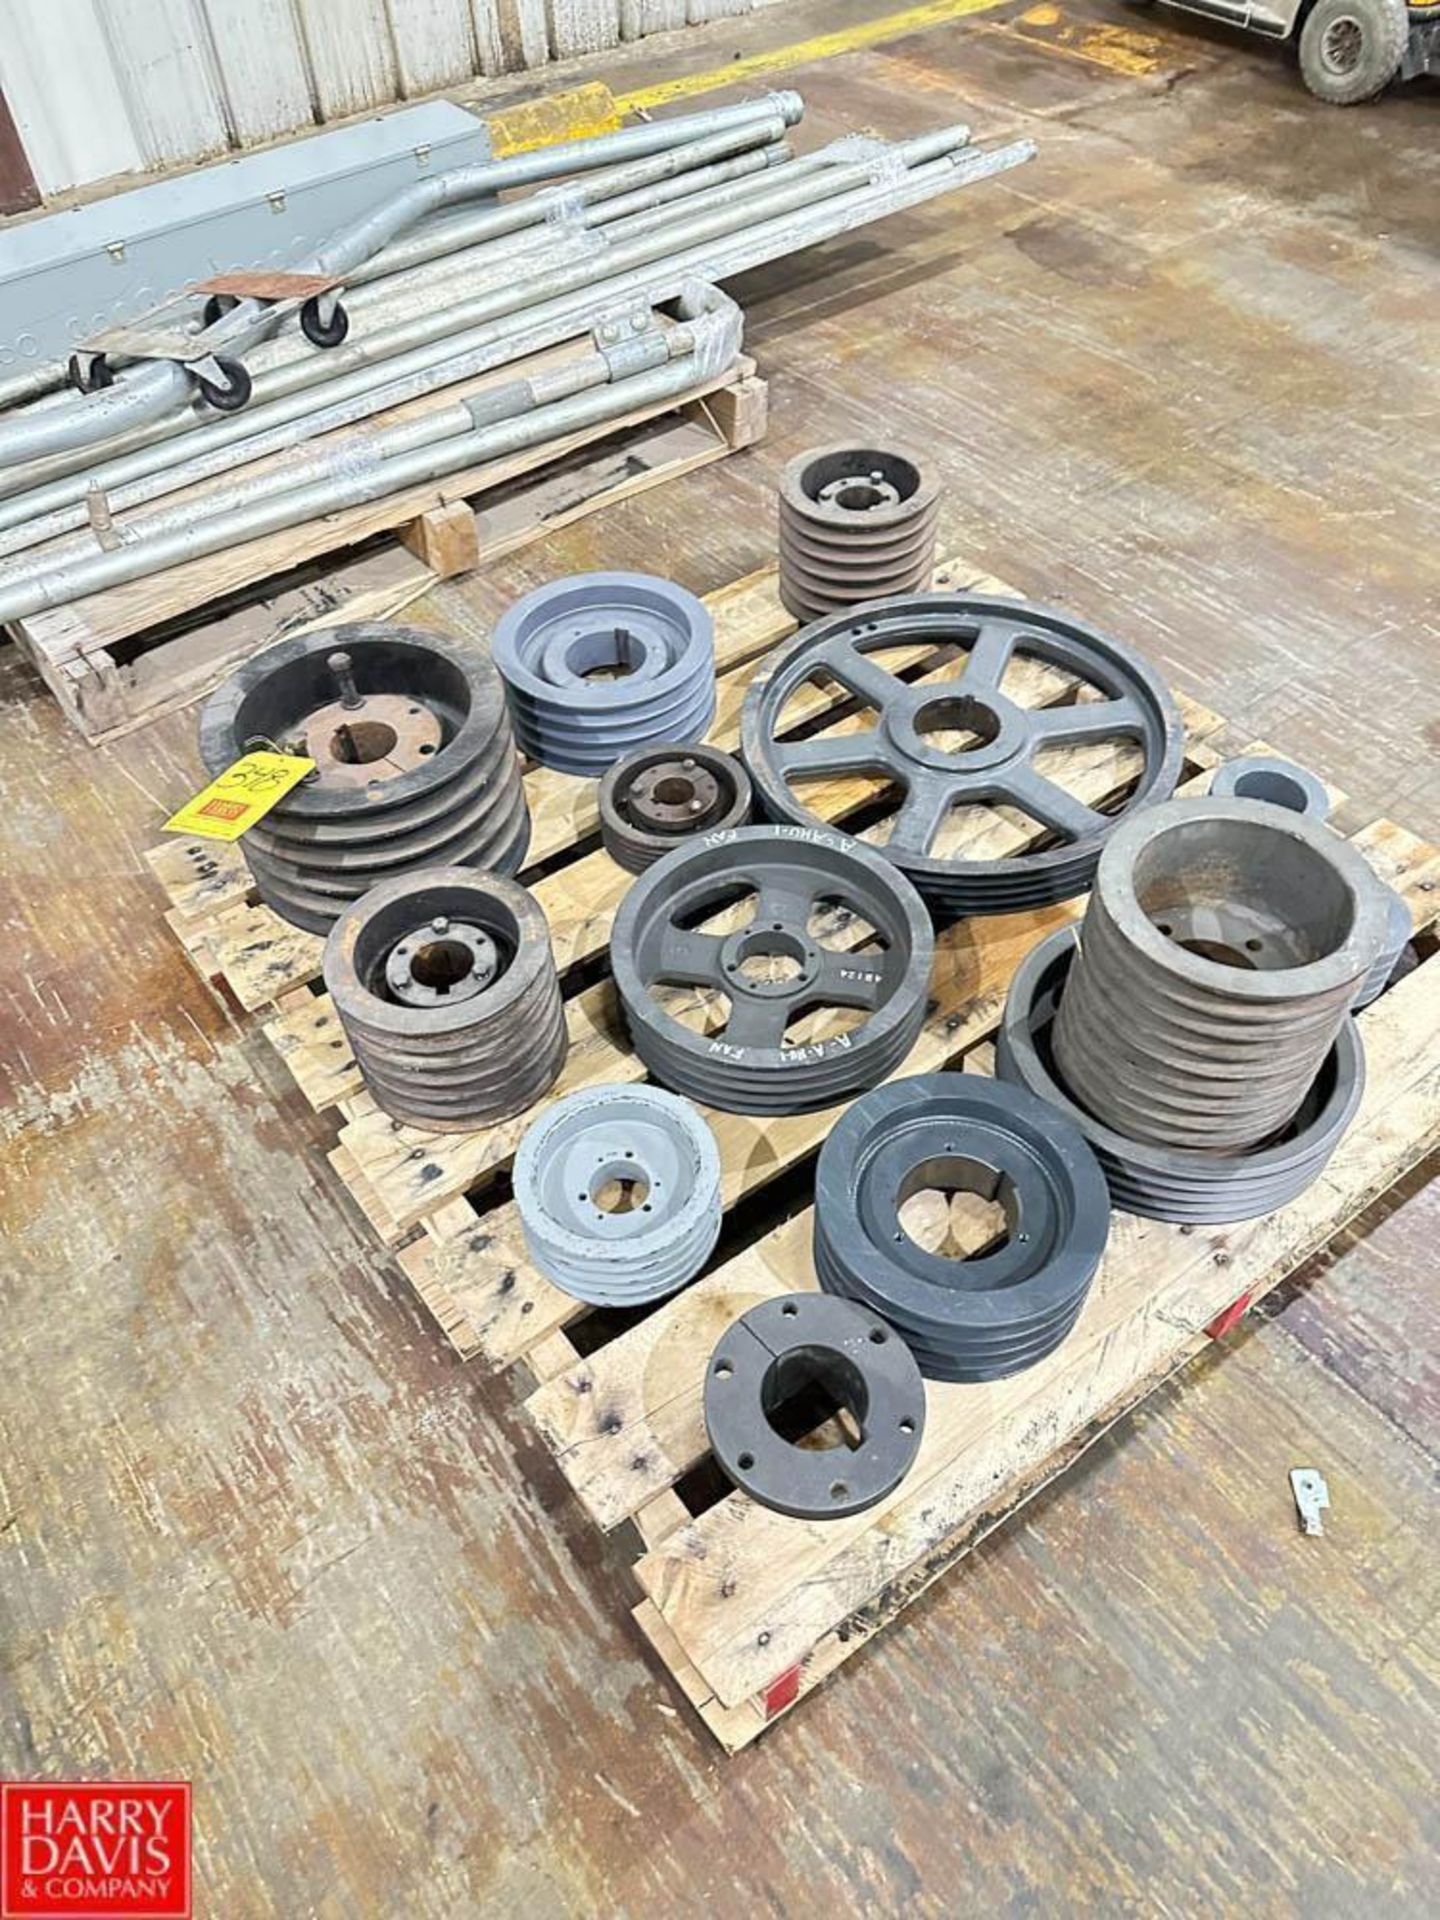 Assorted Pulley Wheels - Rigging Fee: $100